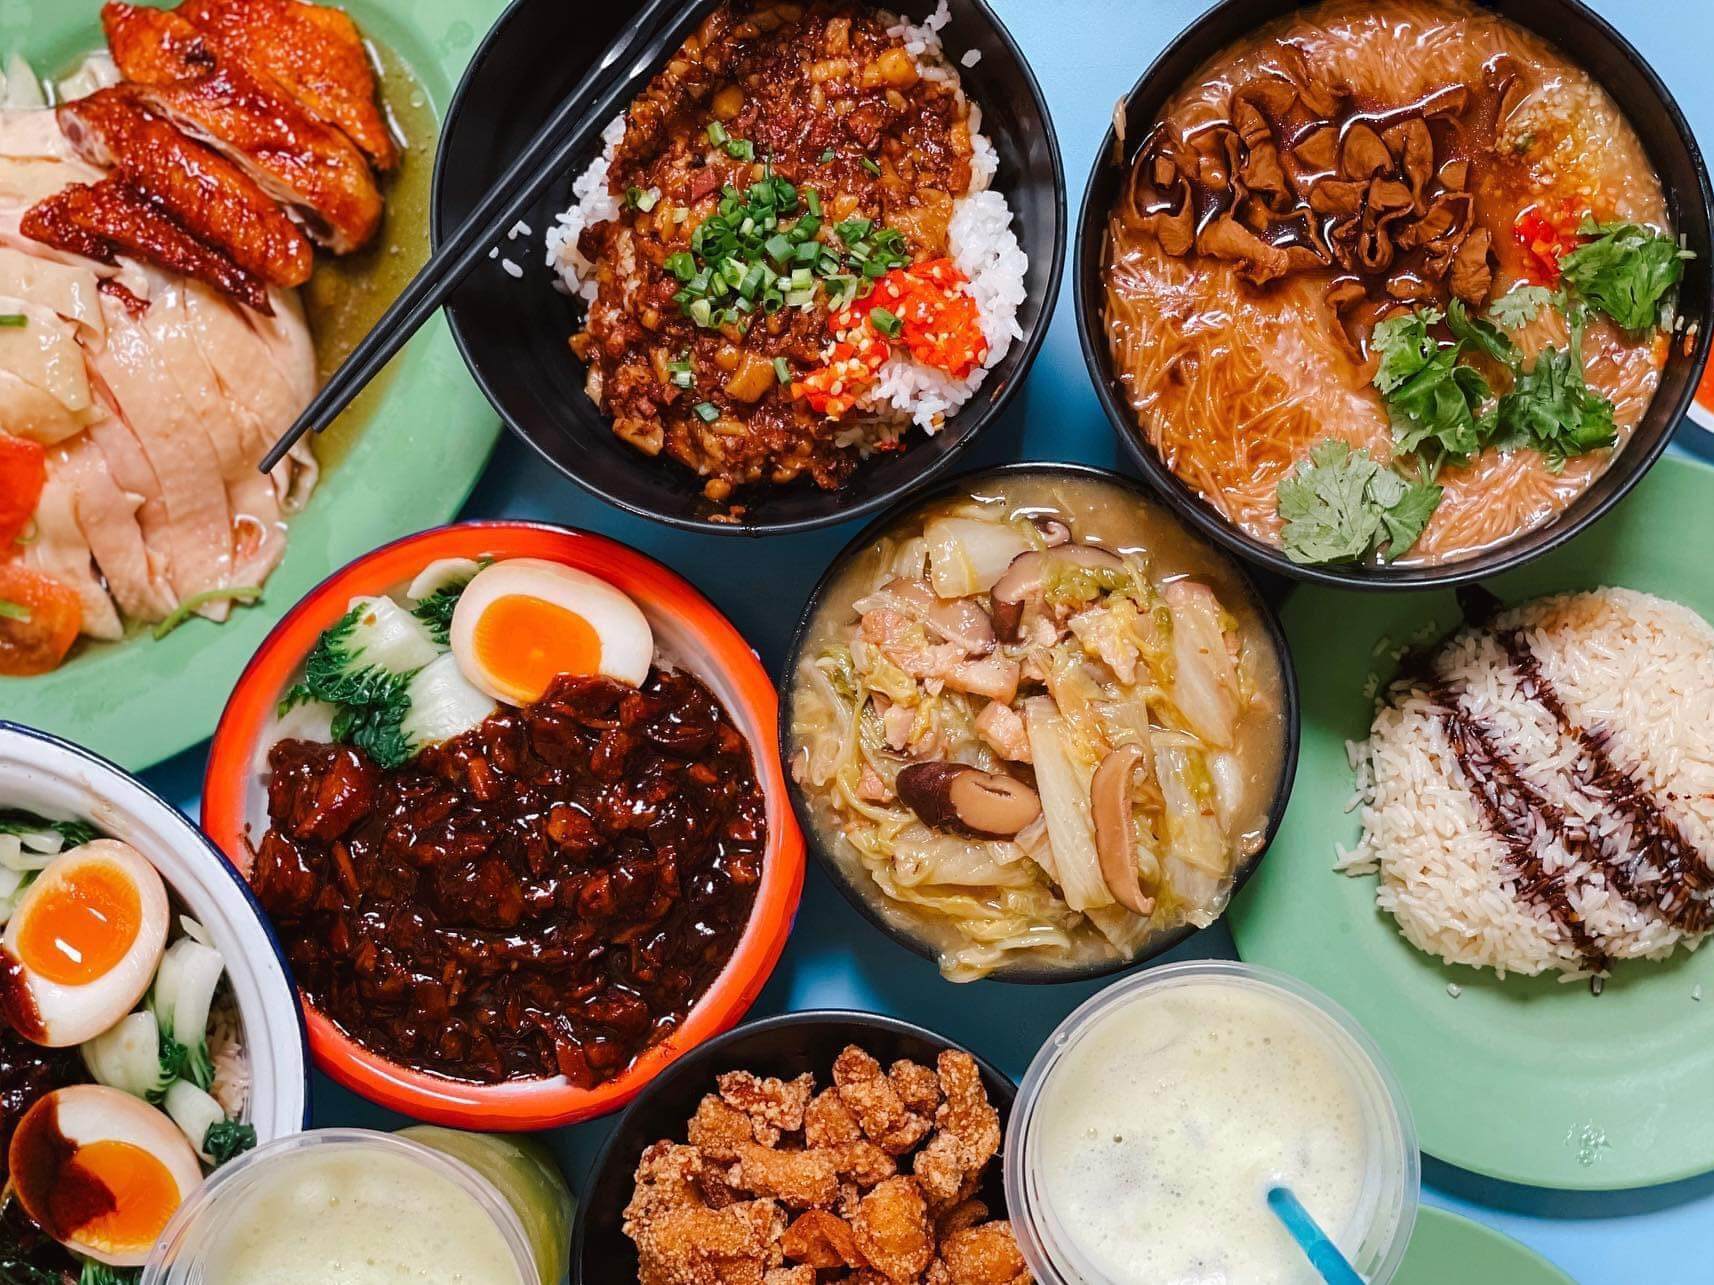 10 places at Golden Mile Food Centre to satisfy your cravings